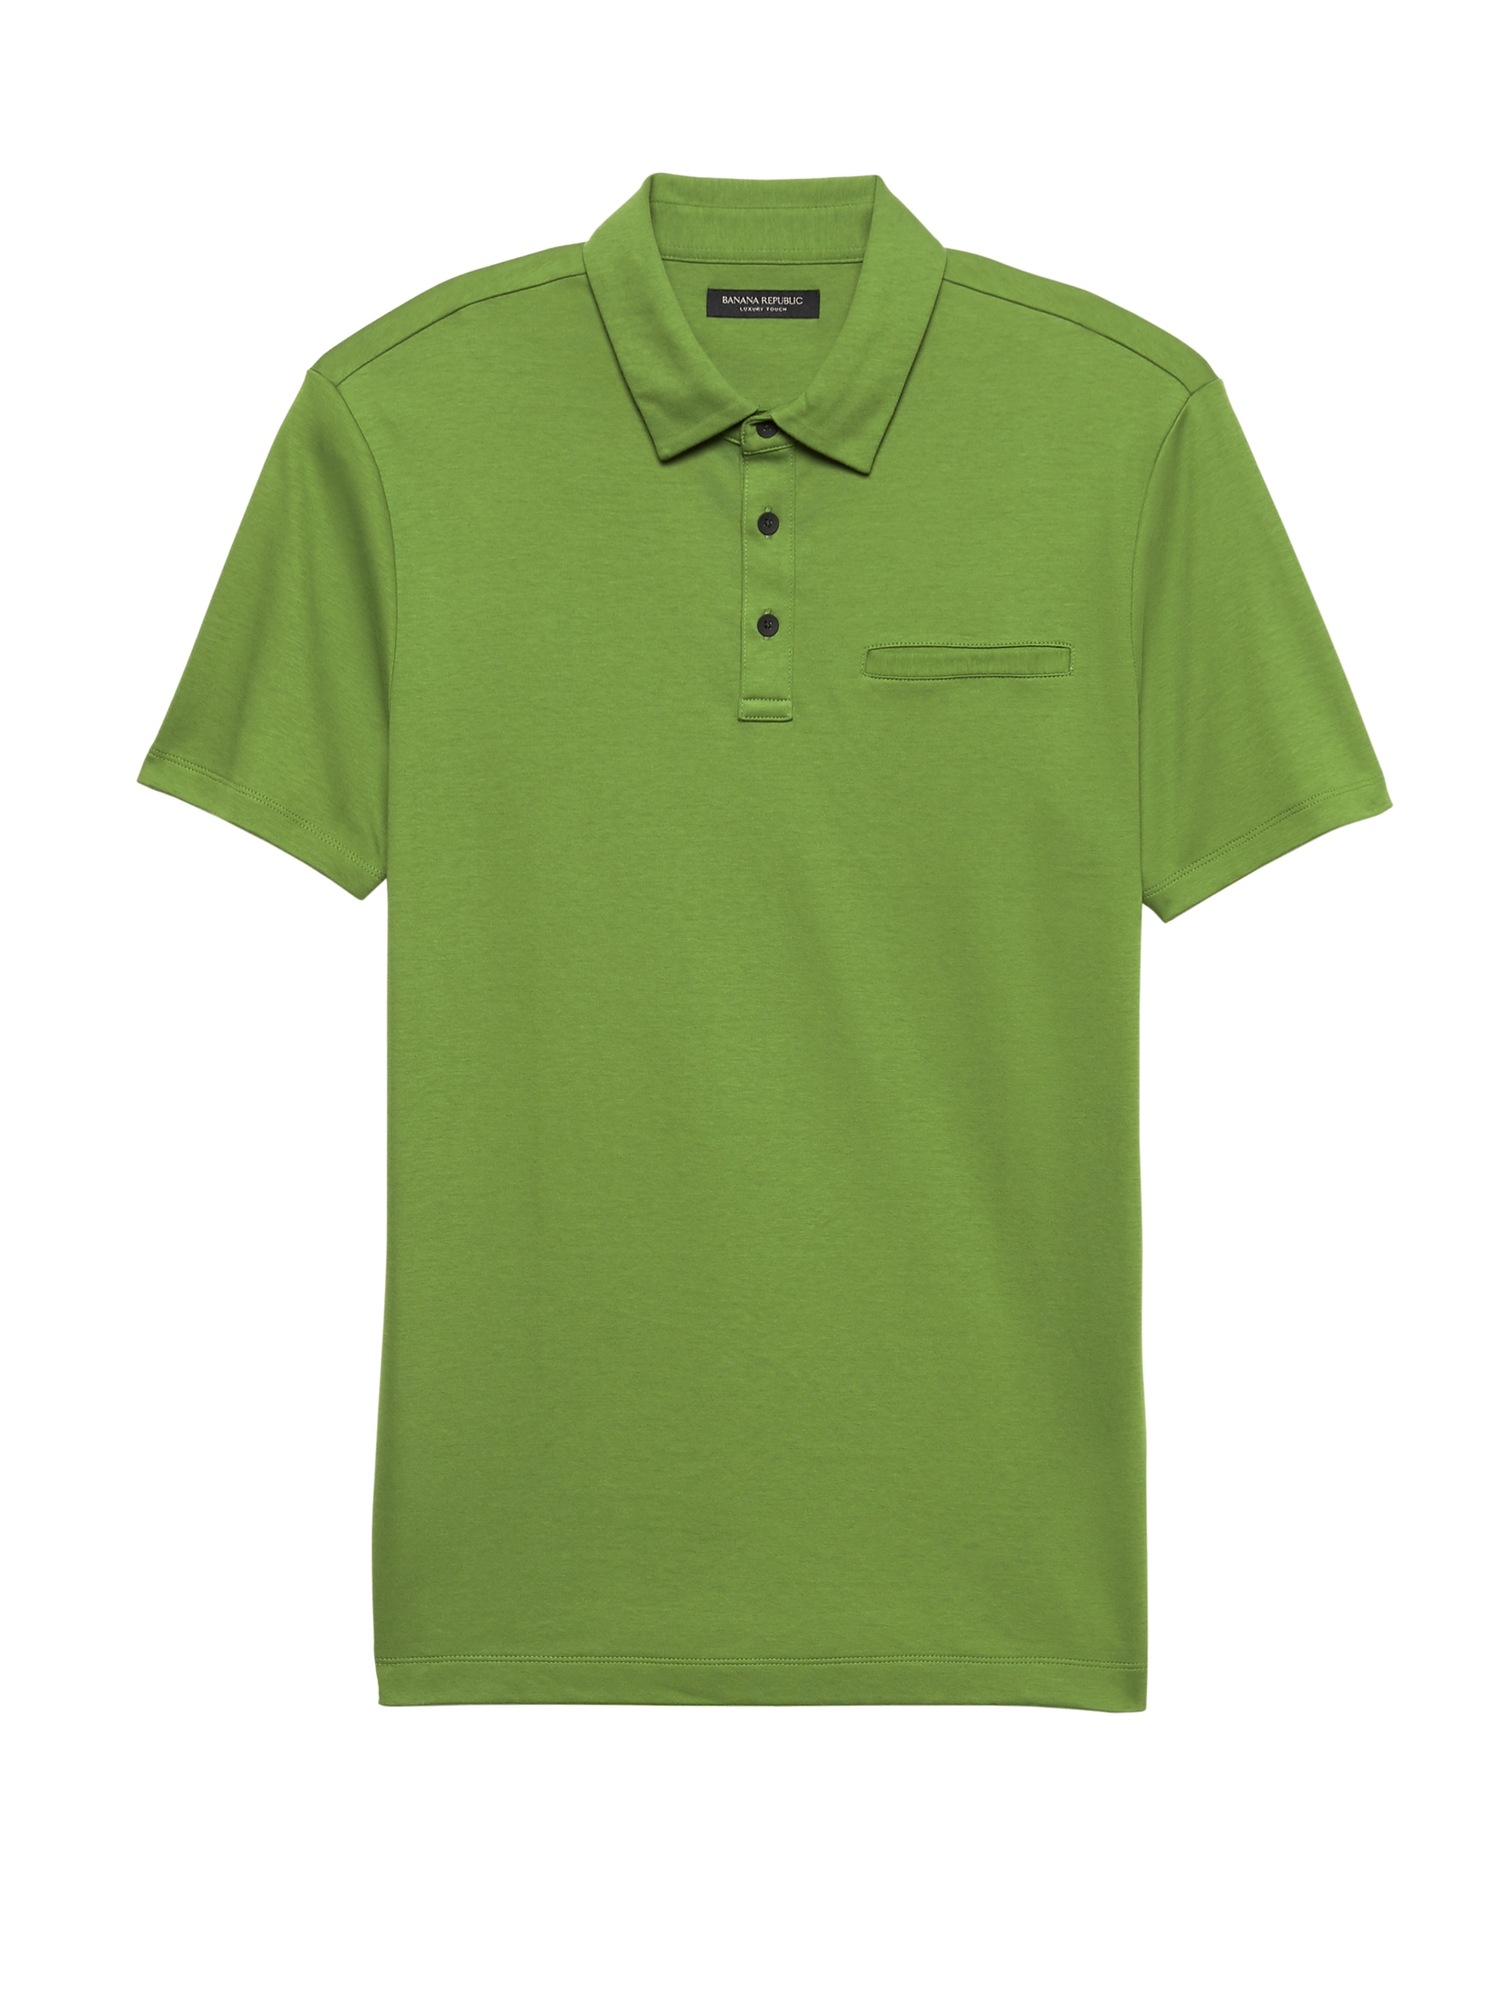 Luxury-Touch Performance Golf Polo